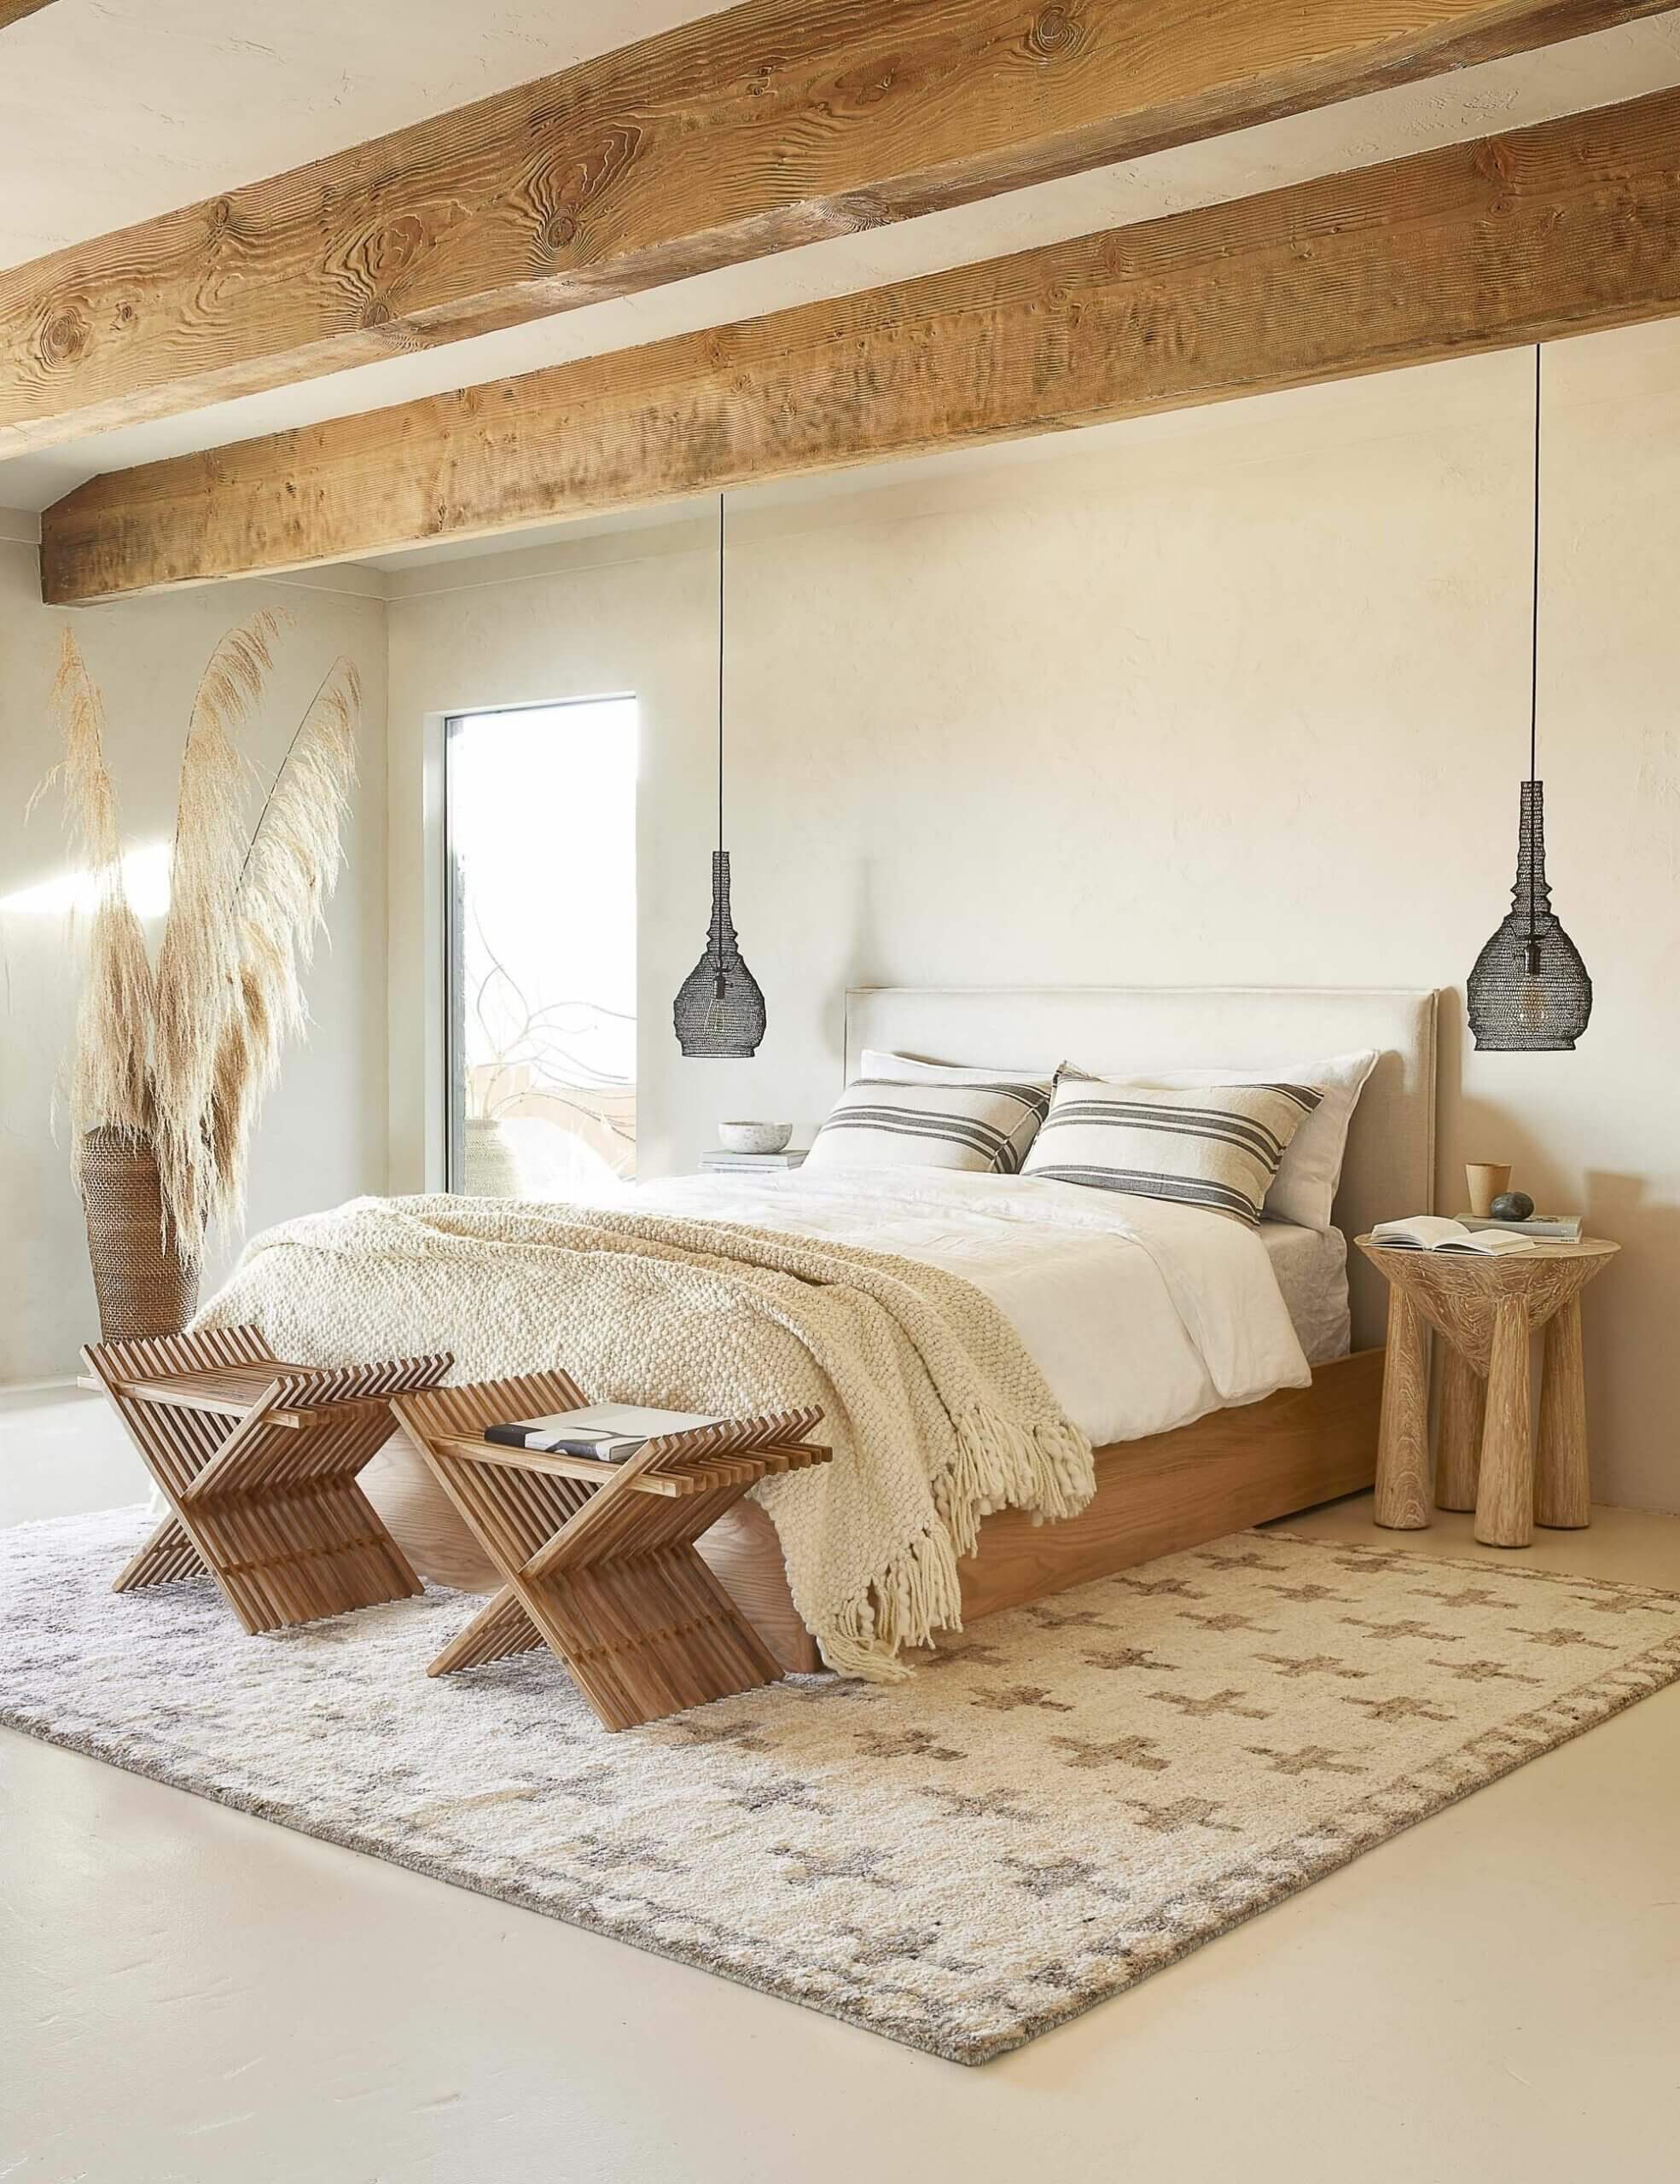 Adopt the exposed beams and the total white look (1)